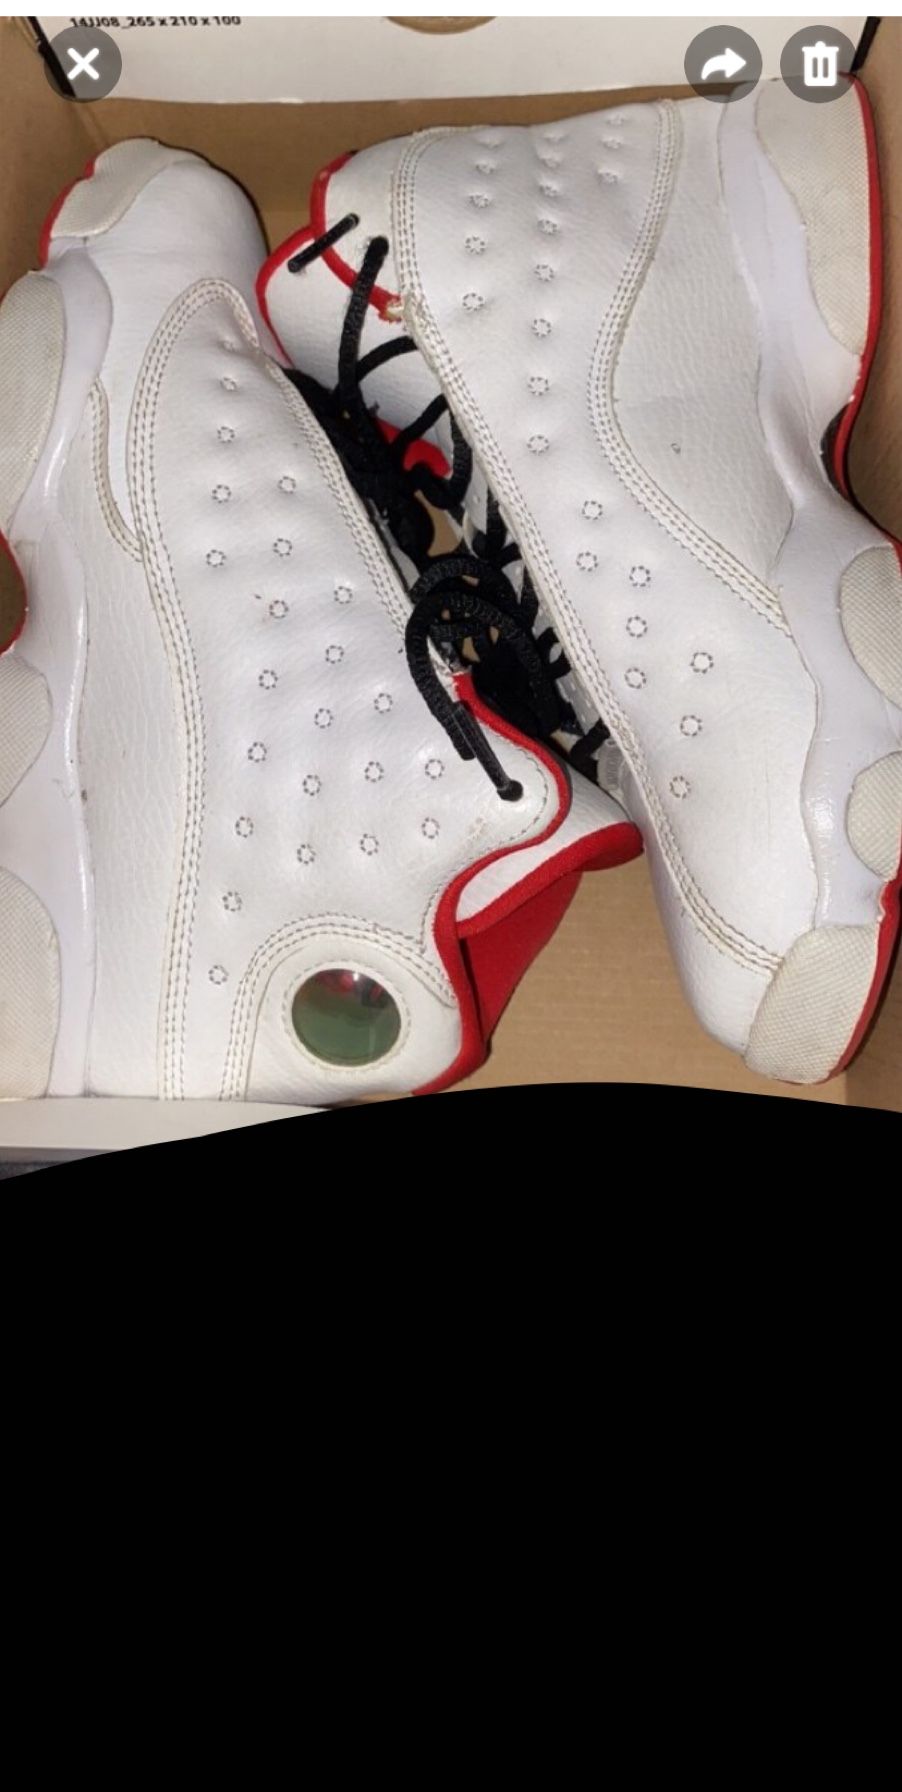 jordan 13 ‘History Of Flight’ size 5y really great condition comes with box